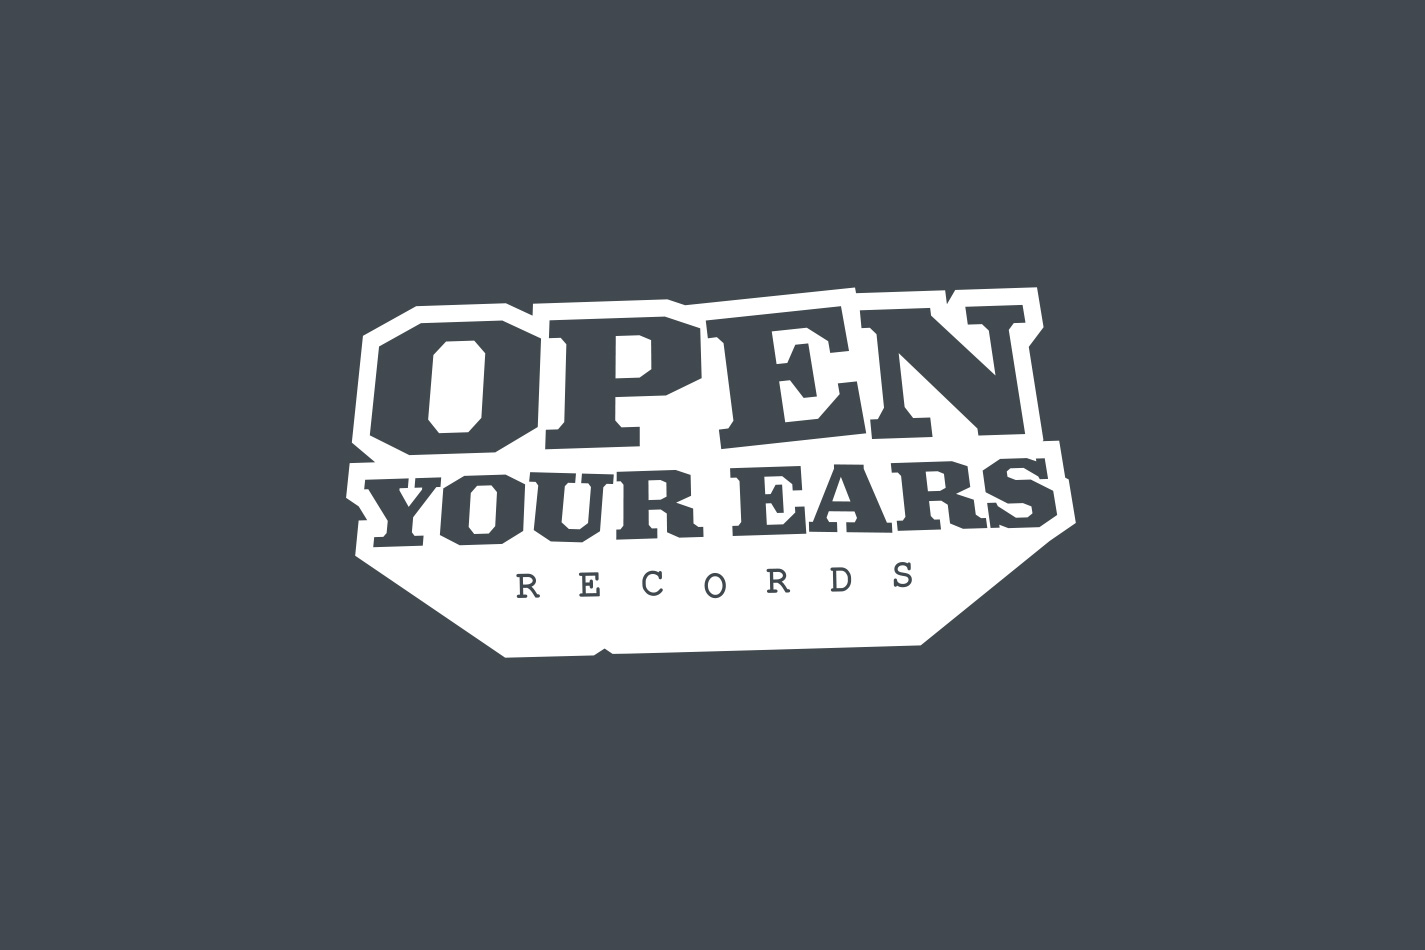 open your ears records logo on gray background